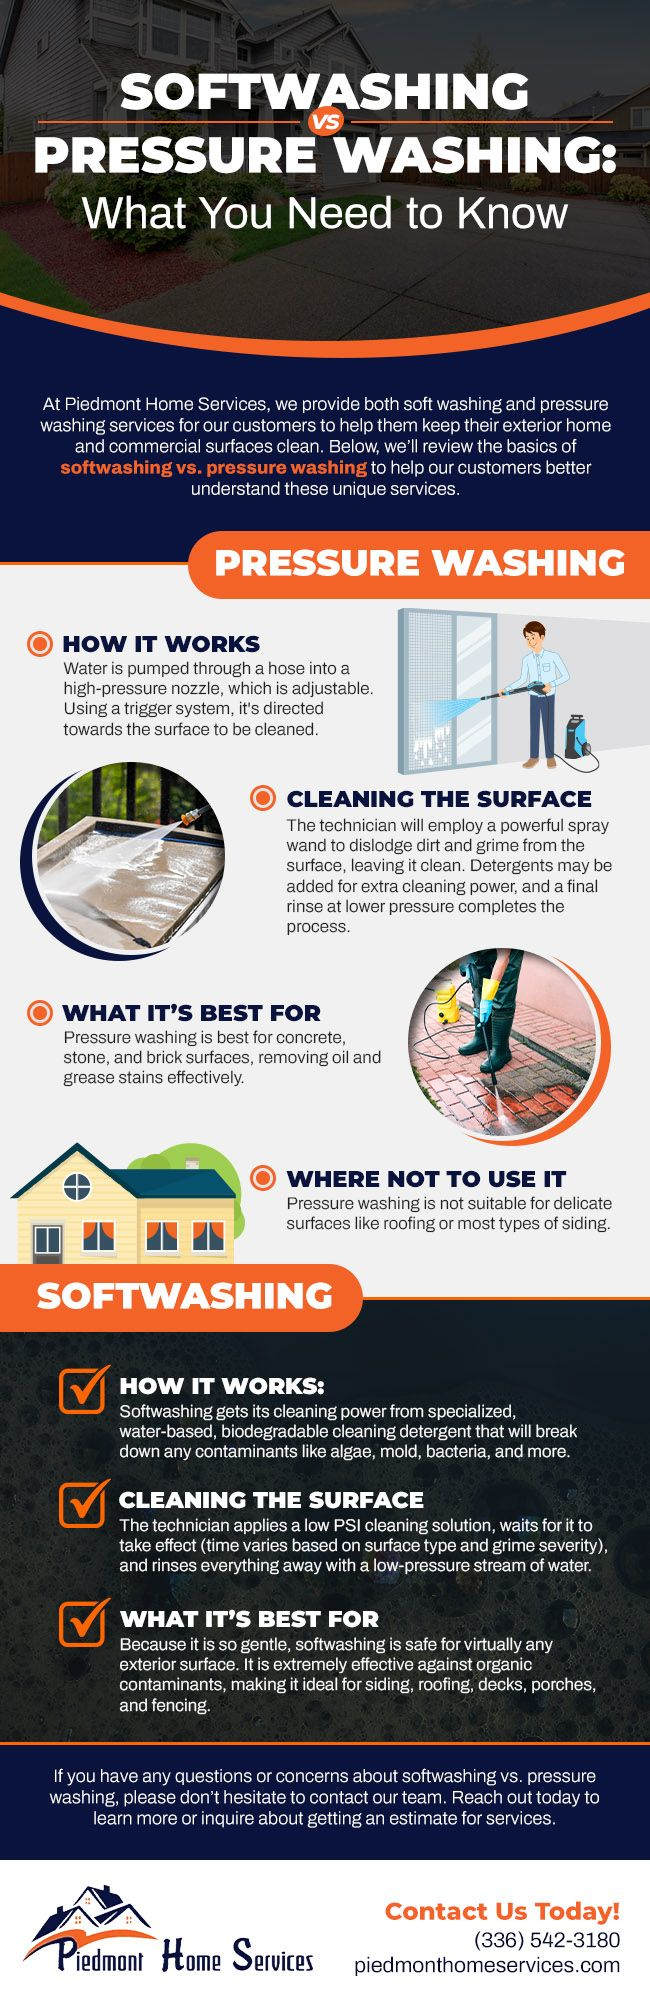 Softwashing vs Pressure Washing: What You Need to Know 